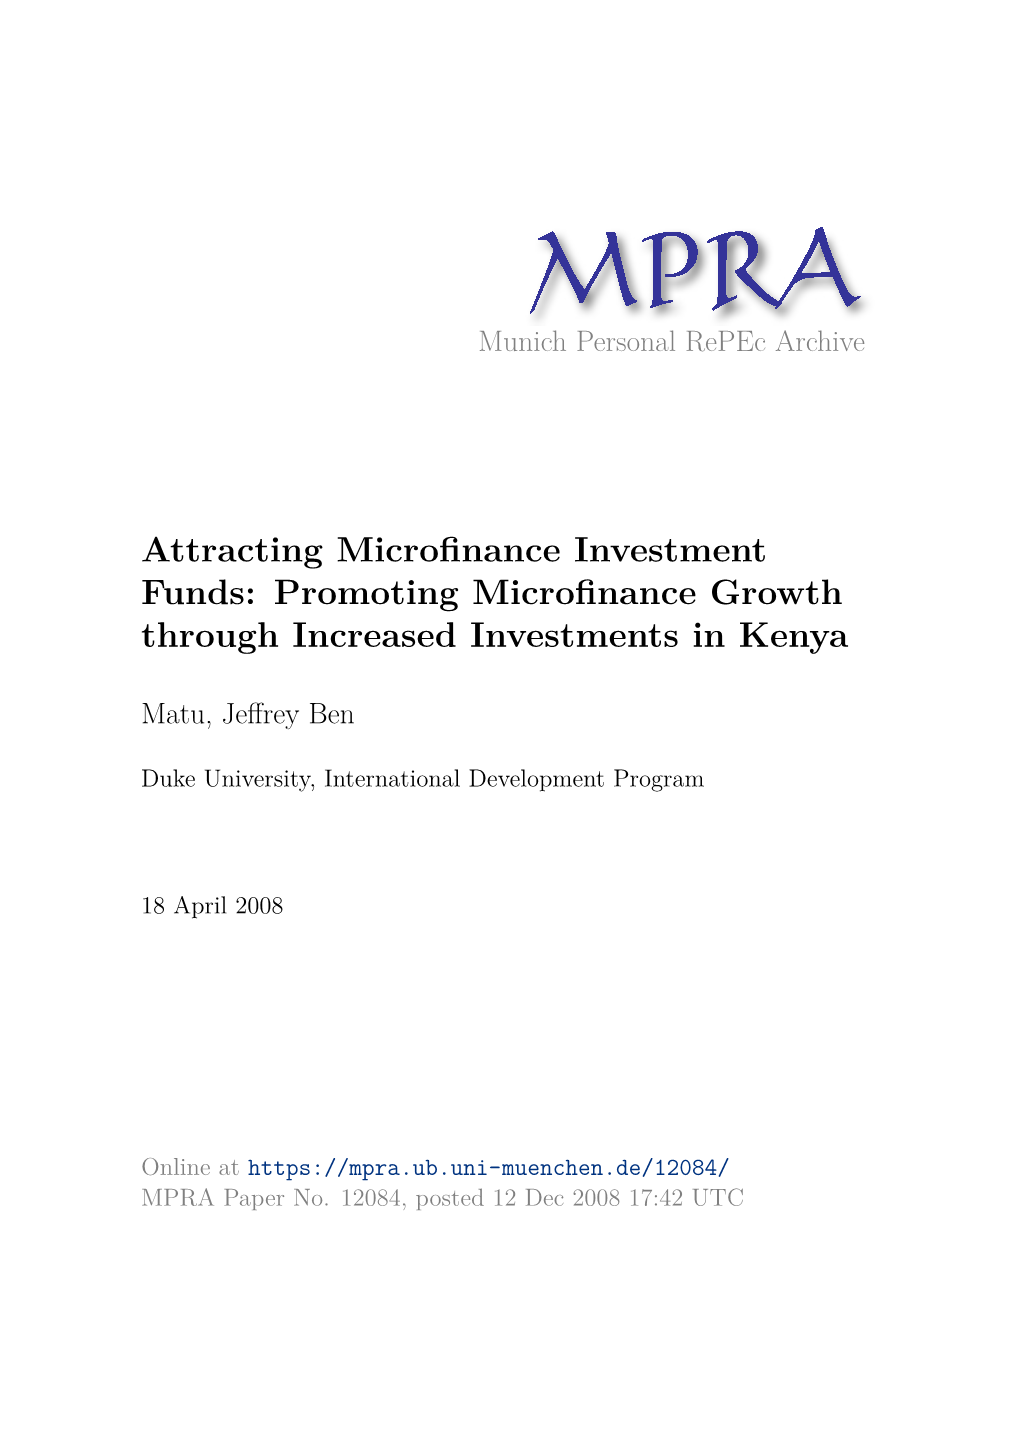 Promoting Microfinance Growth Through Increased Investments In